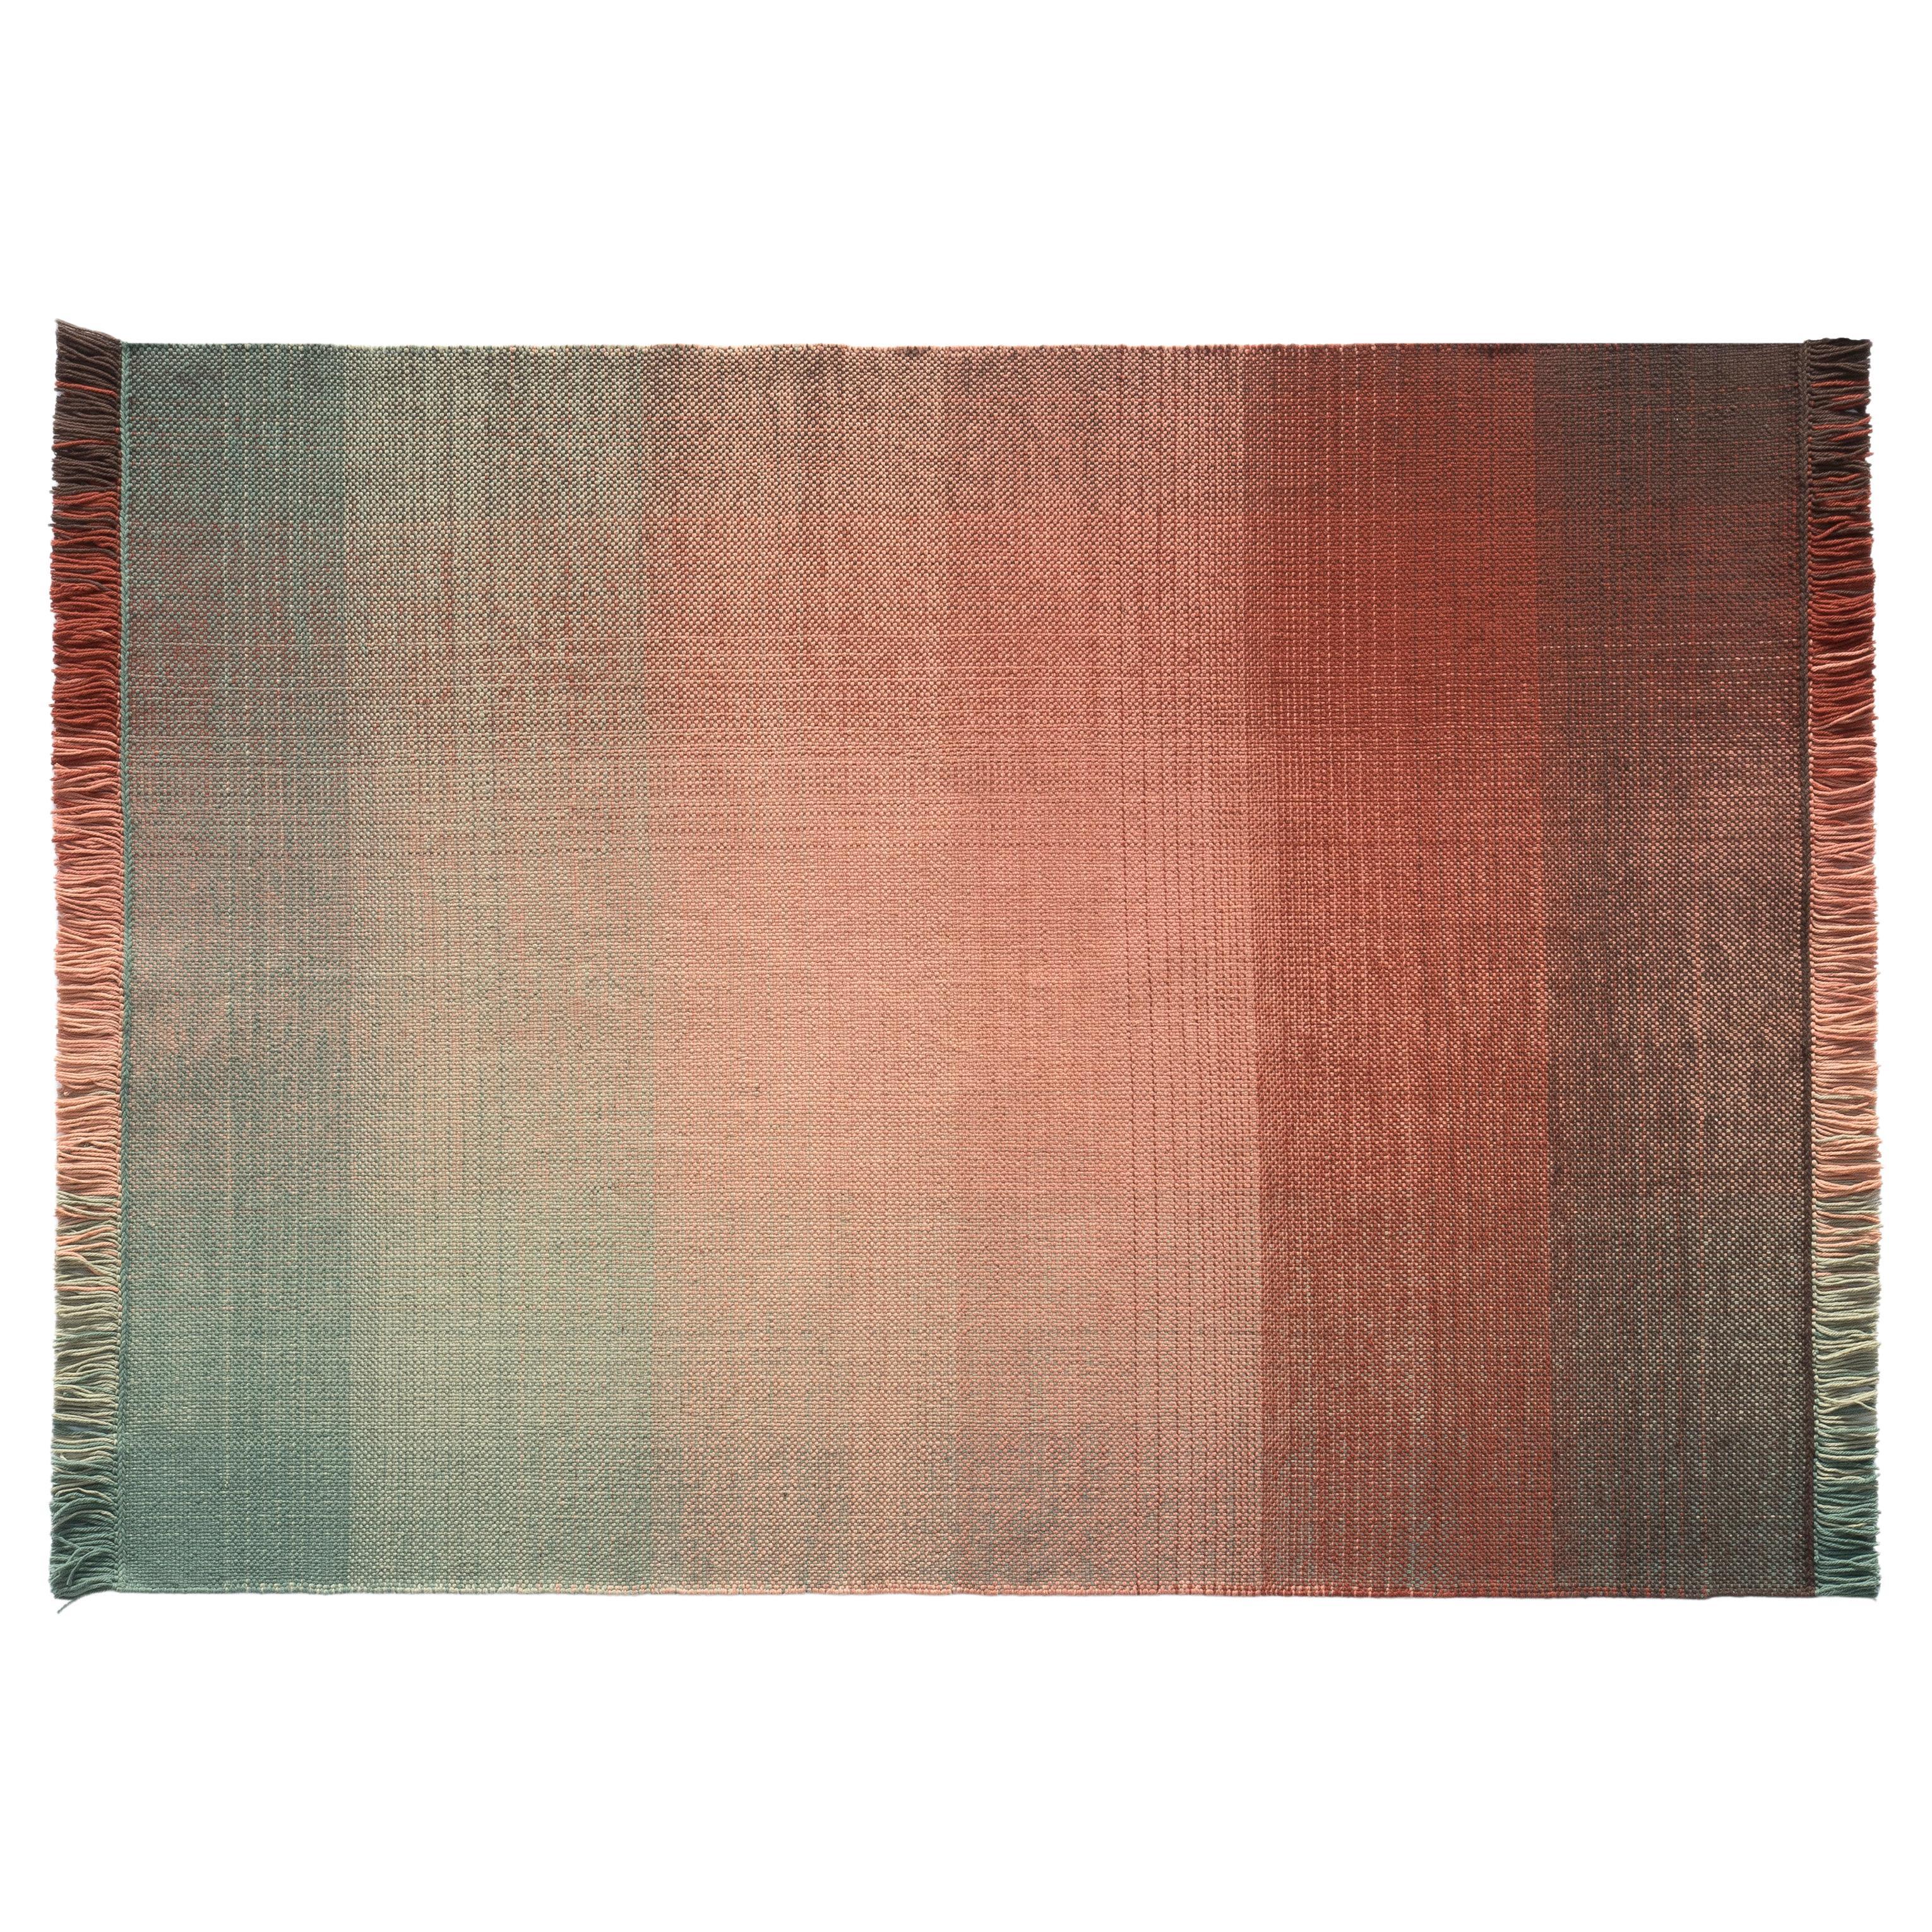 Small 'Shade' Hand-Loomed Outdoor Rug for Nanimarquina